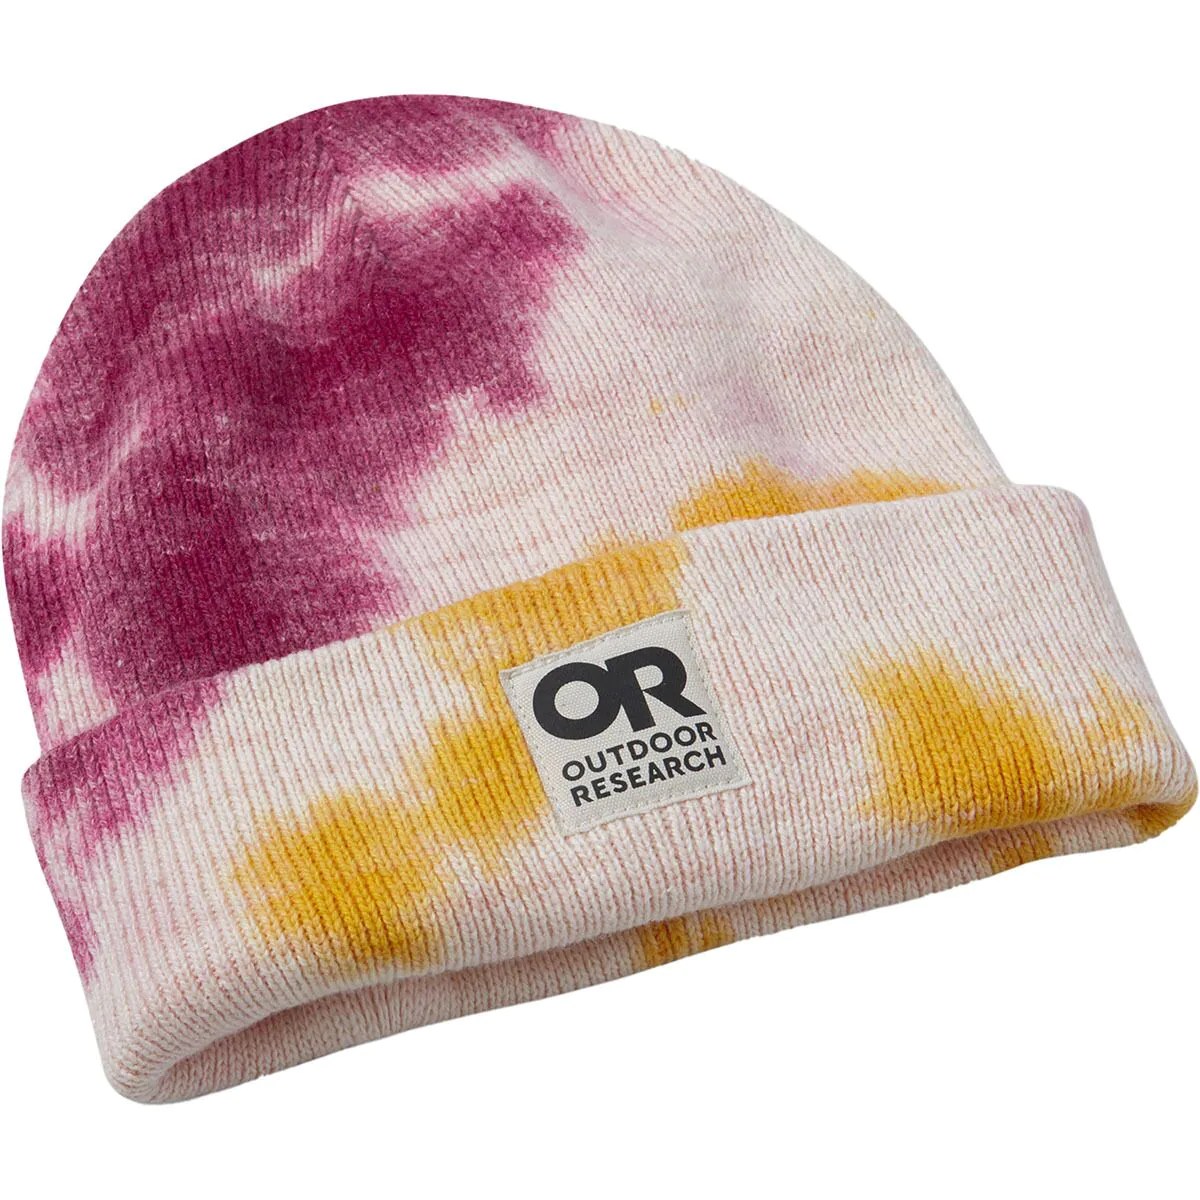 outdoor research tie dye beanie that's on sale at backcountry, on a white background